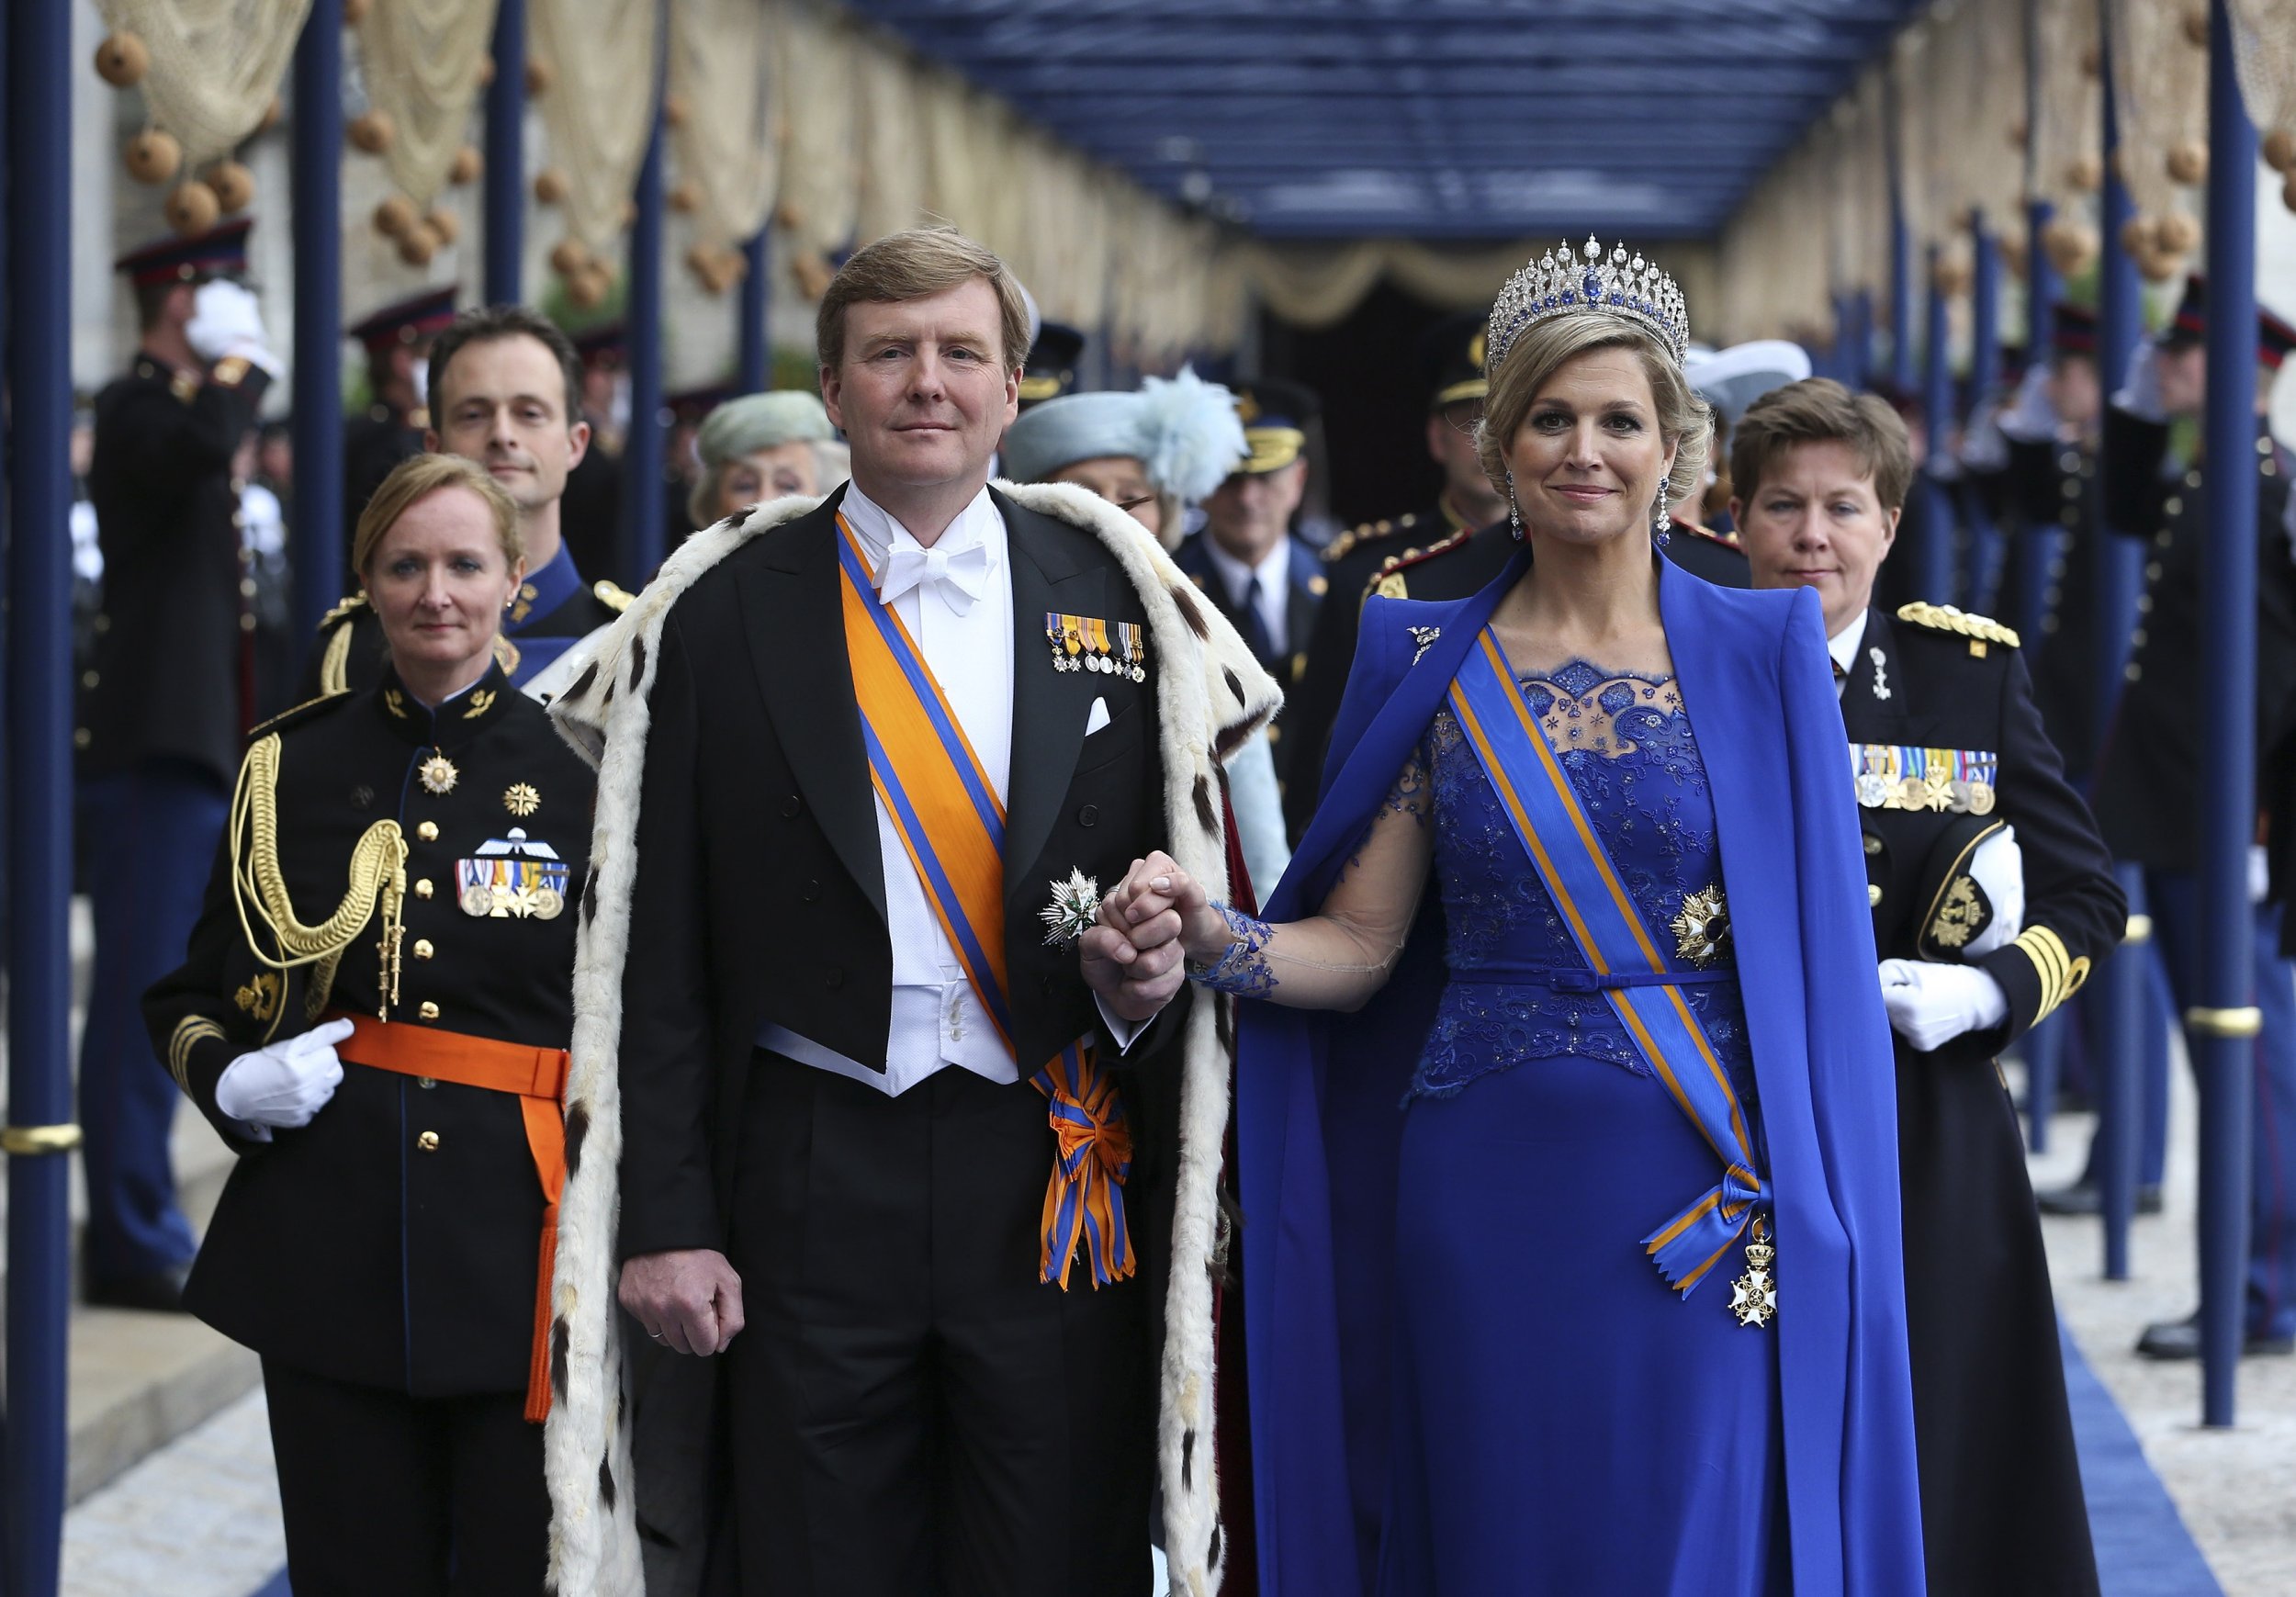 King Willem-Alexander and Queen Mxima of the Netherlands